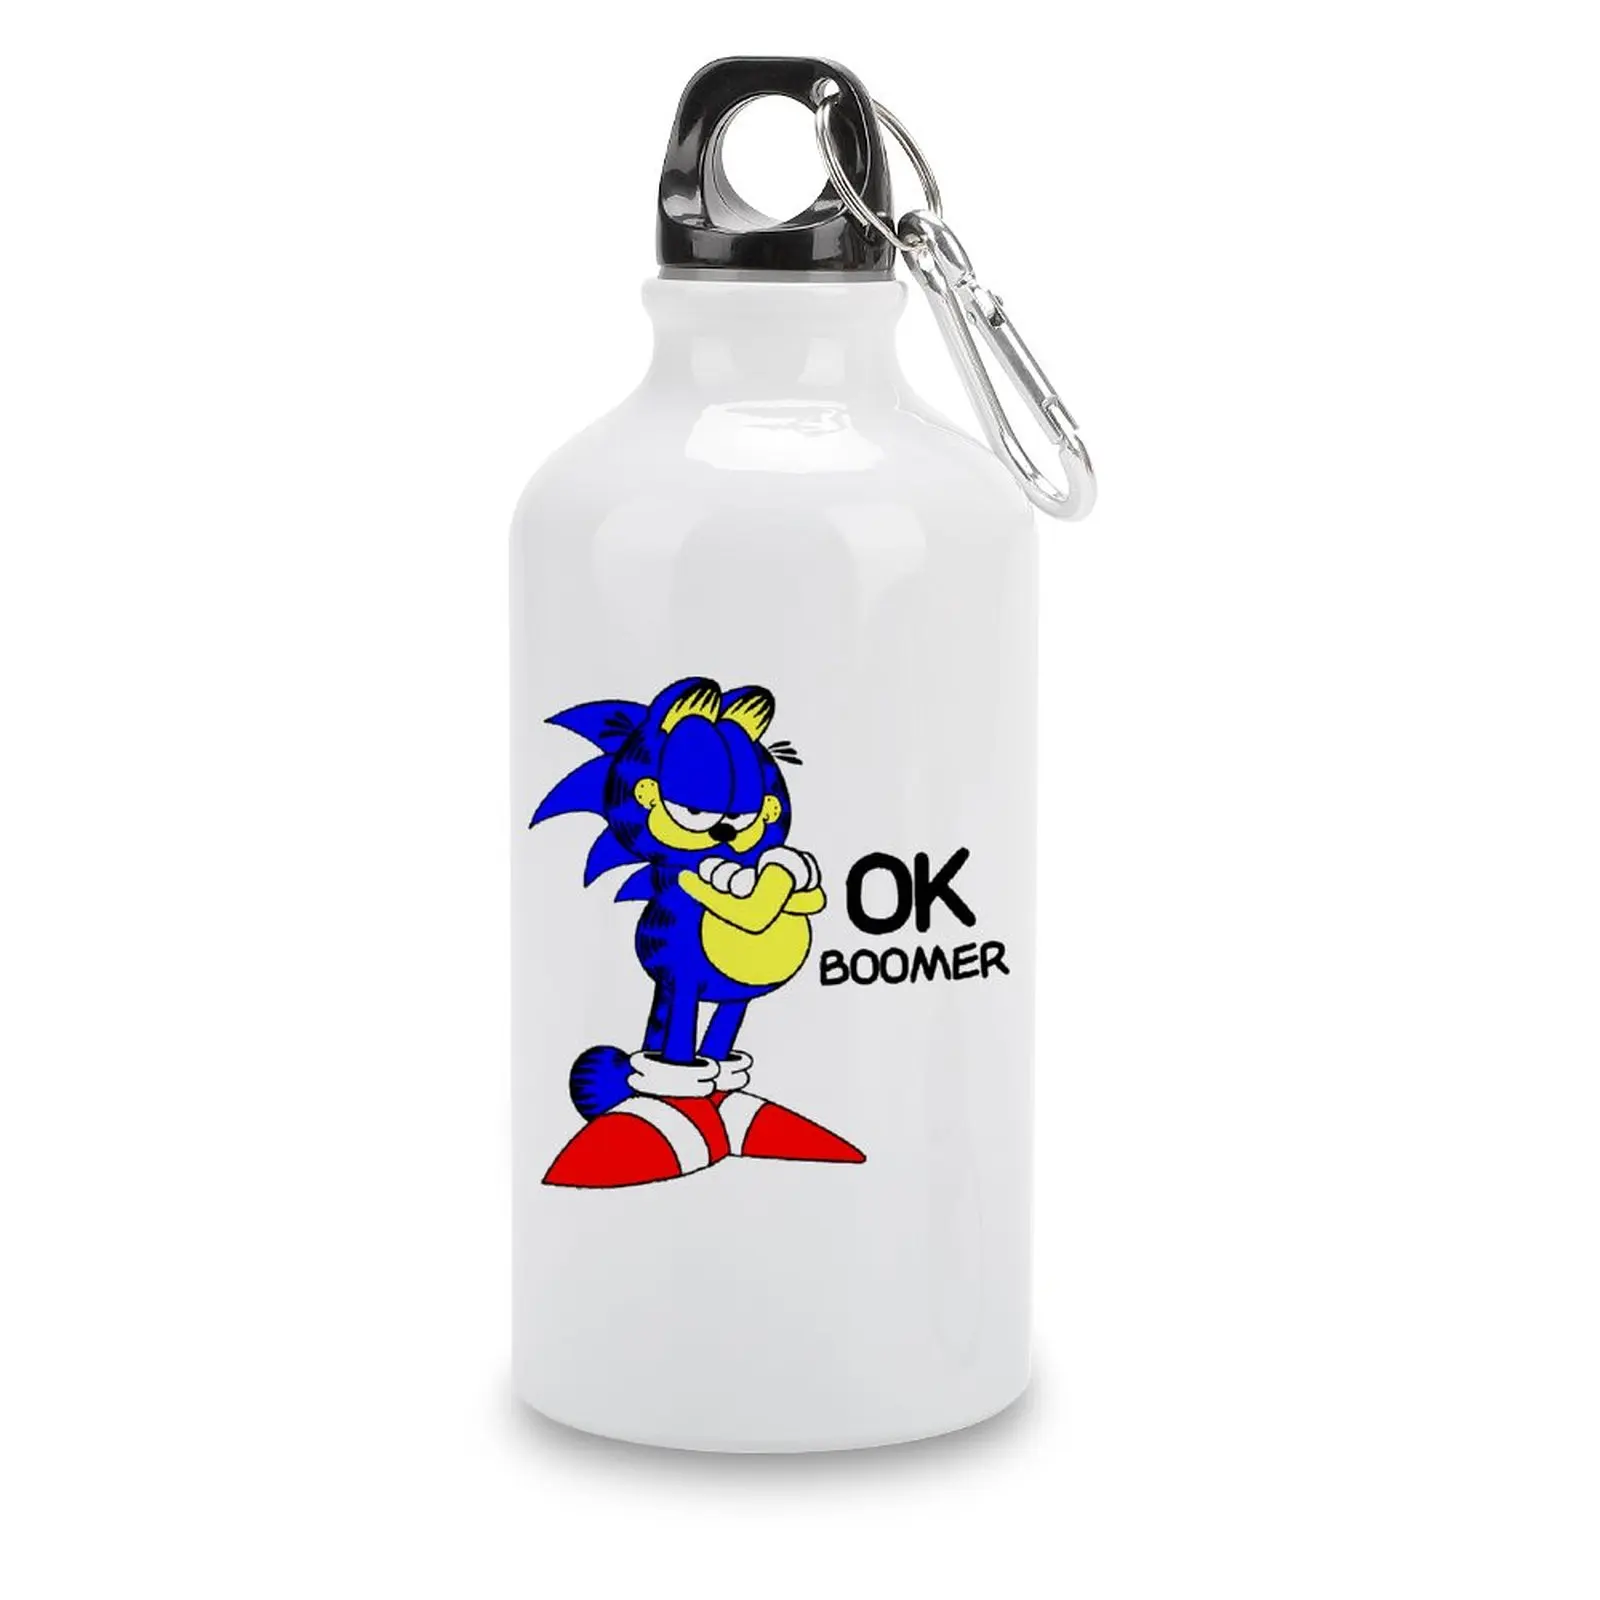 

DIY Bottle Ok Boomer Sanic The Garfile Cat Sport Bottle Aluminum Coffee Cups Thermos Flask Top Quality Humor Graphic Kettle